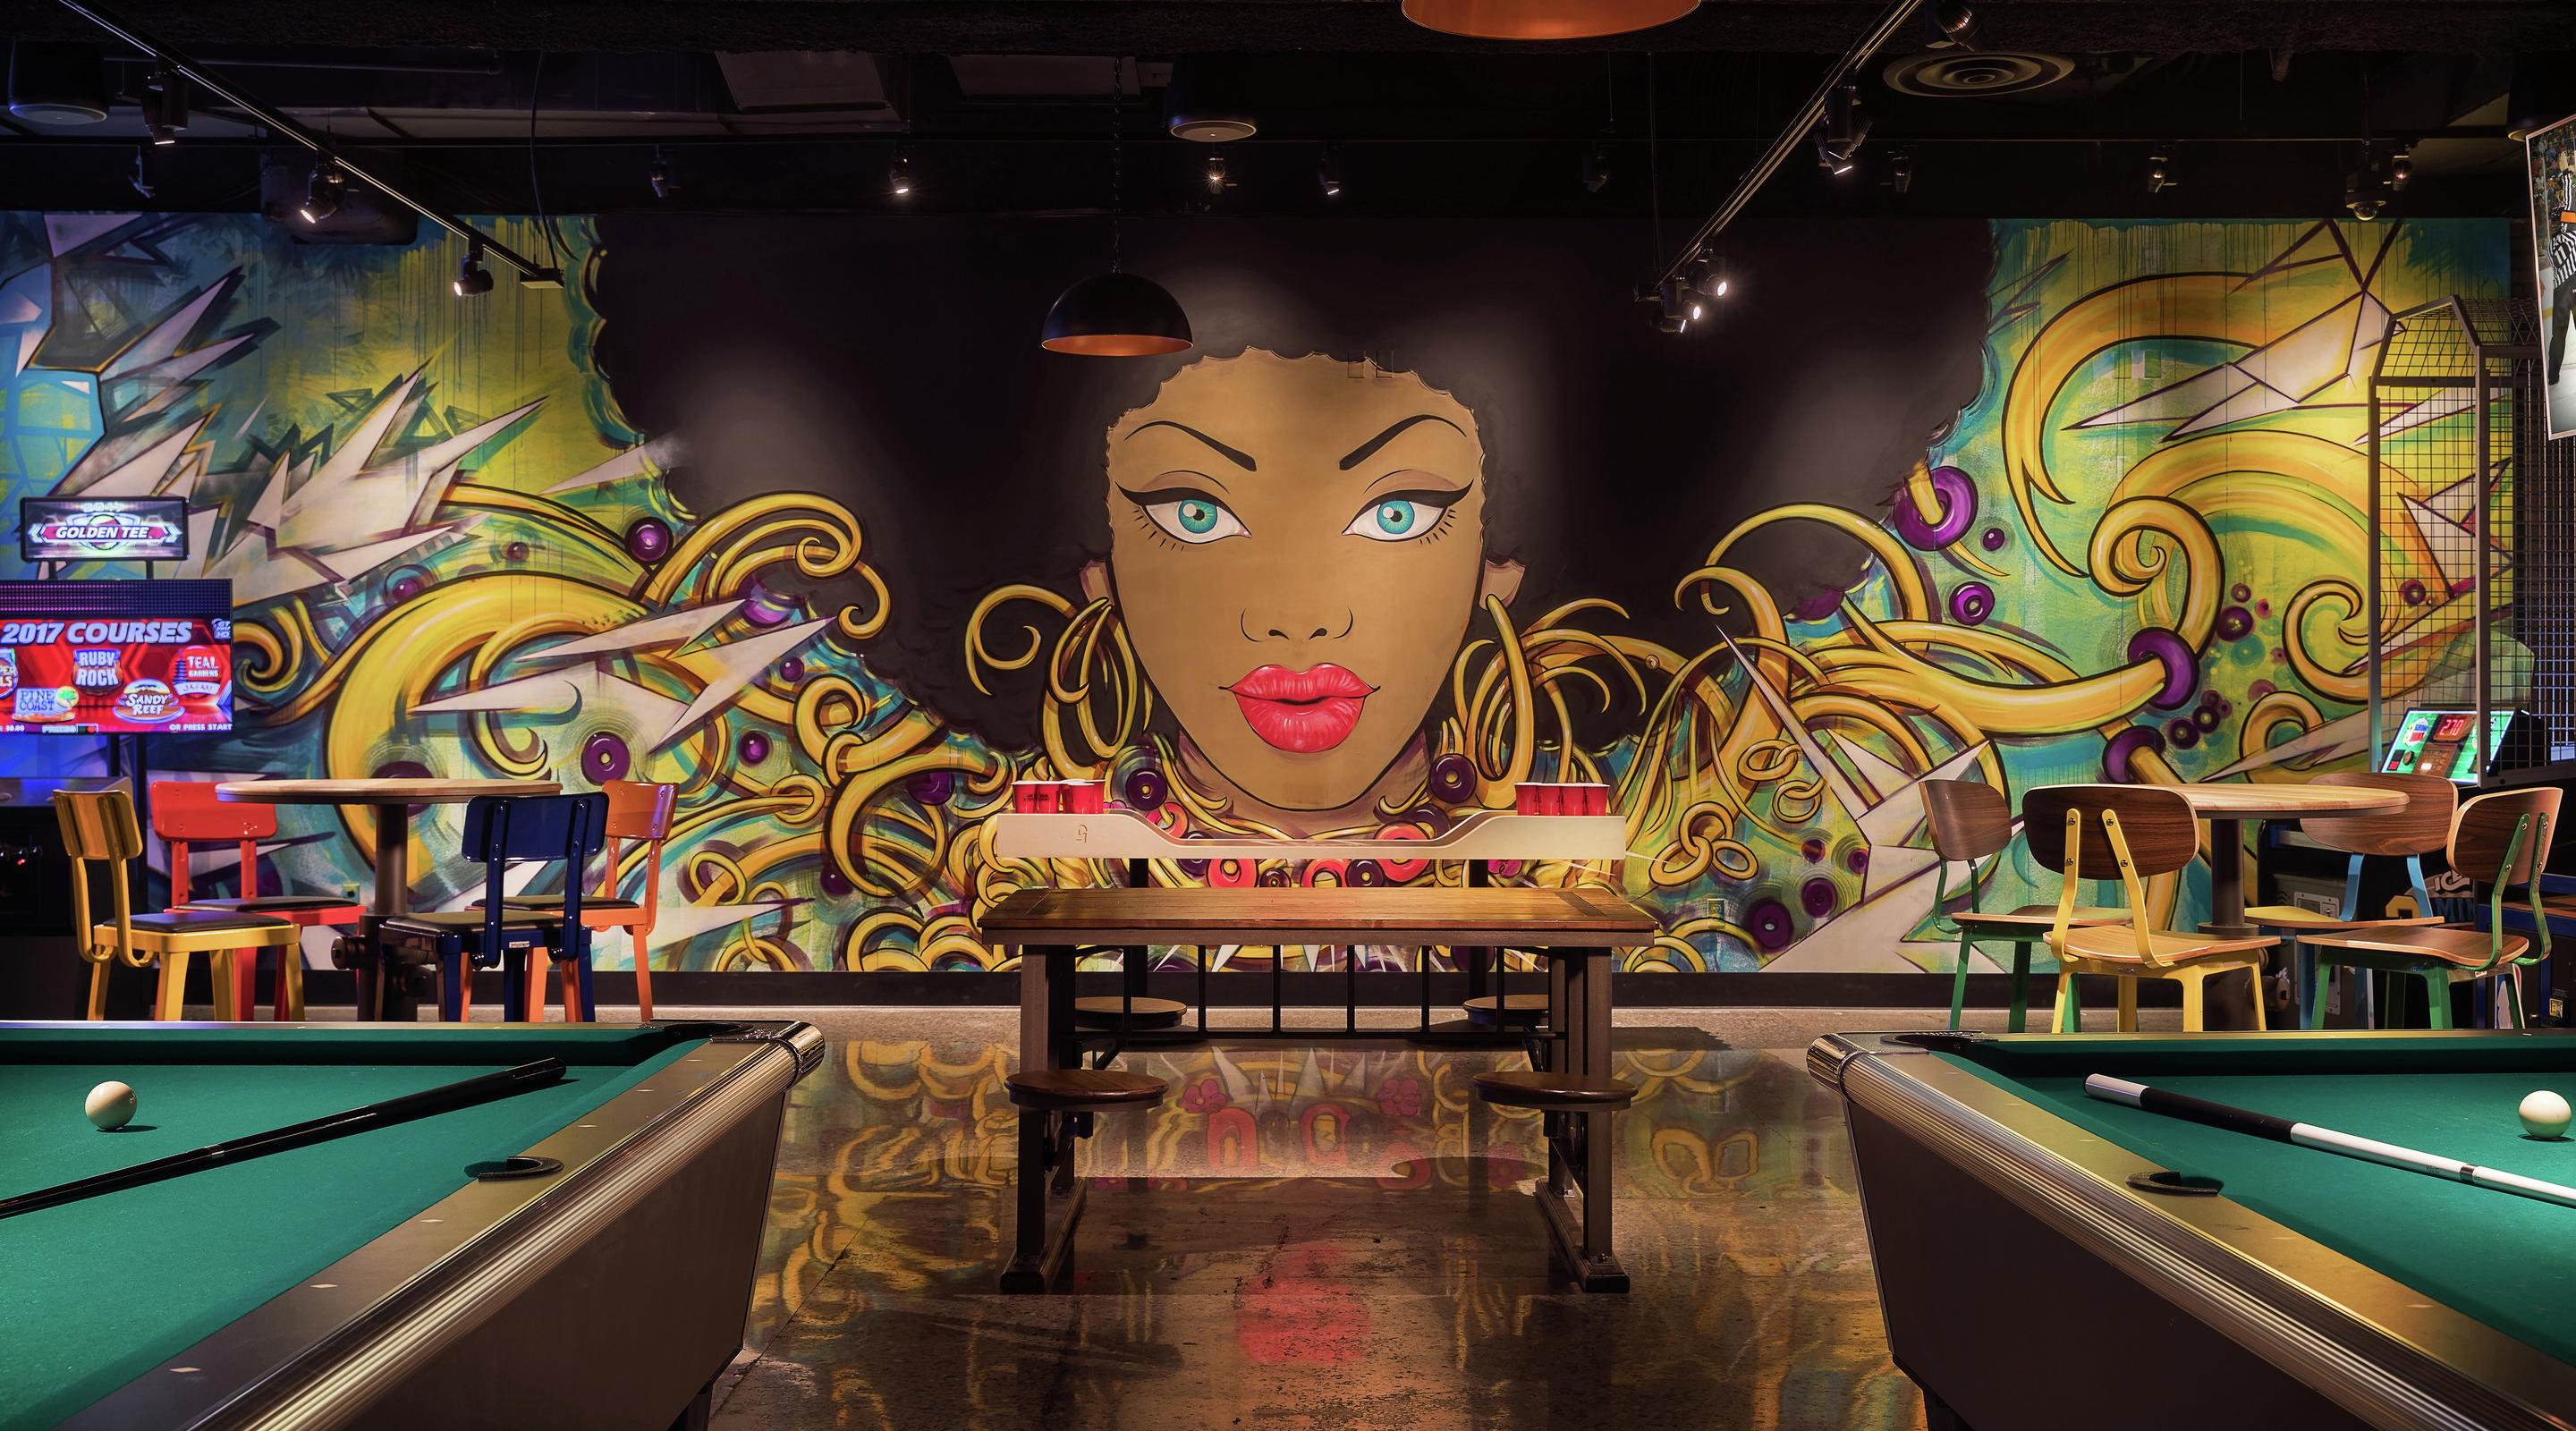 Mural and gaming area at Level Up inside MGM Grand.